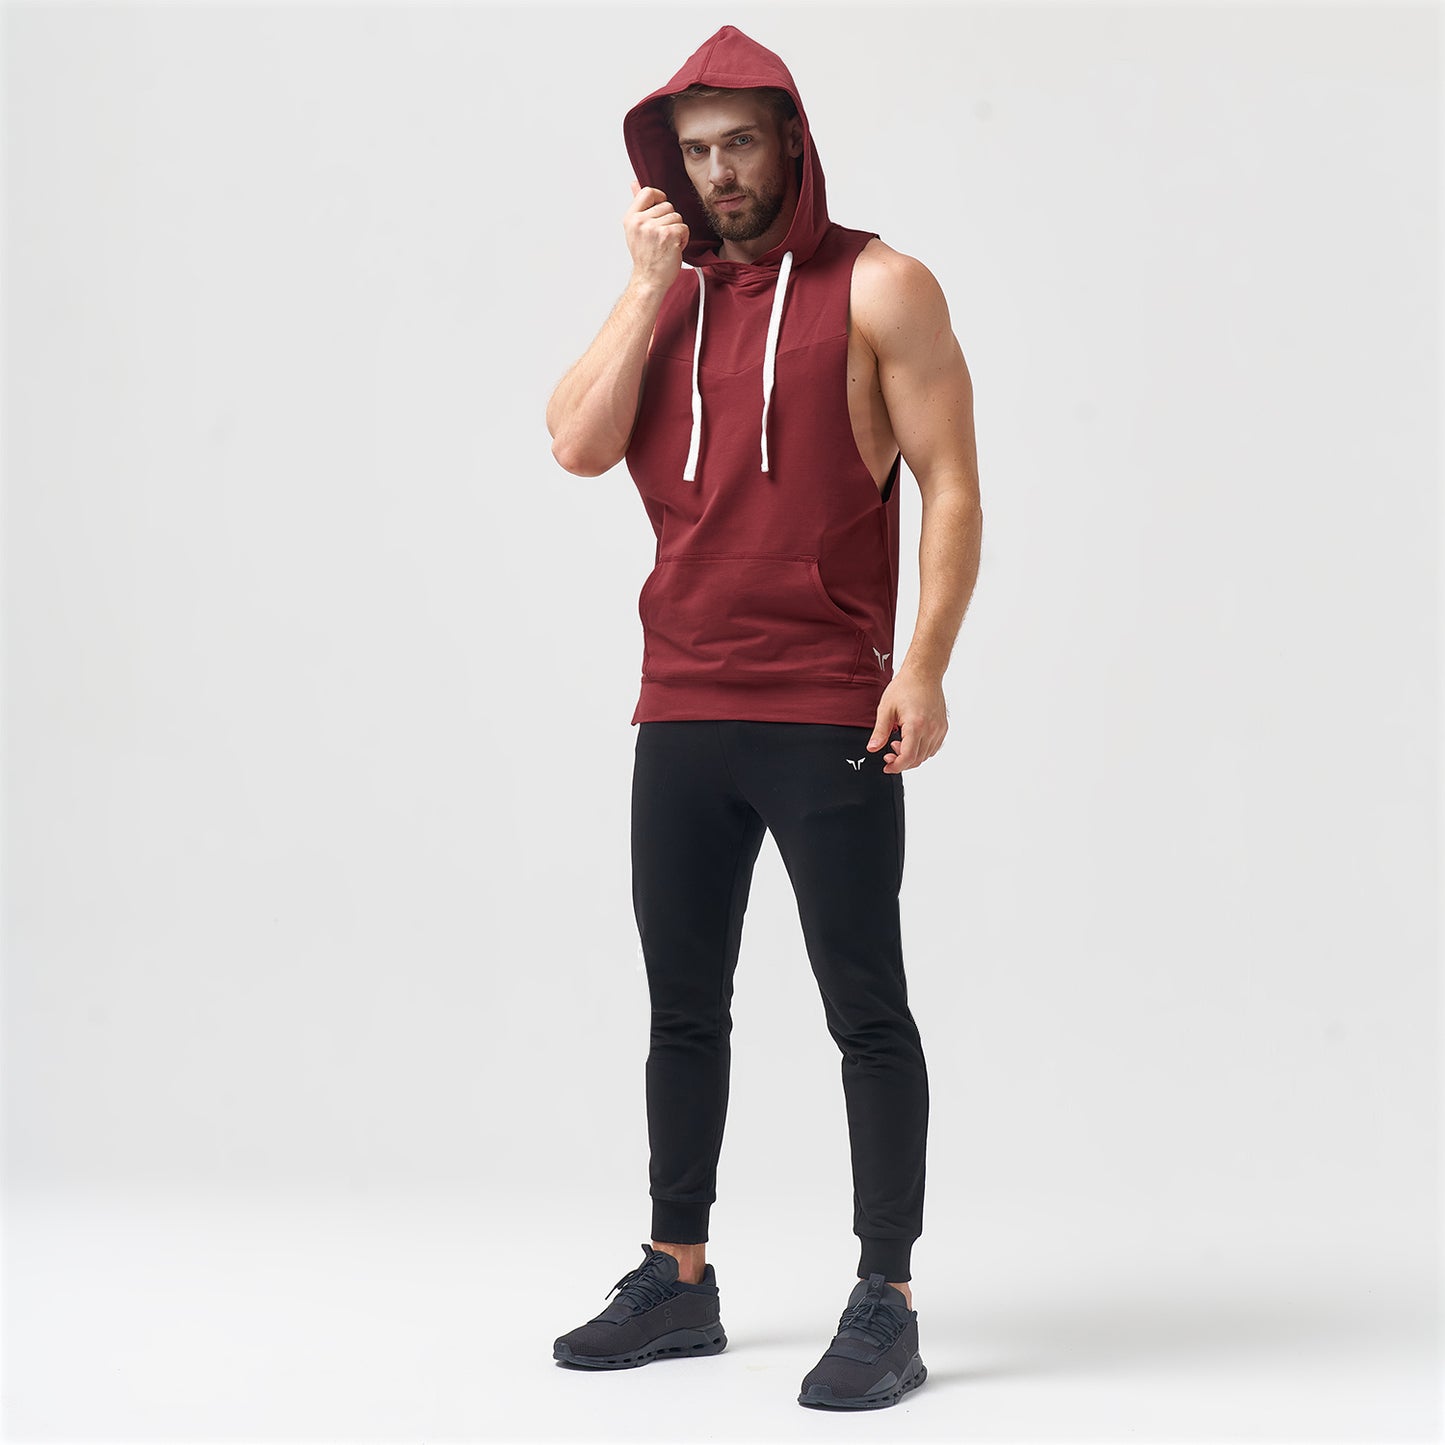 squatwolf-sleeveless-gym-hoodies-adonis-maroon-workout-clothes-for-men